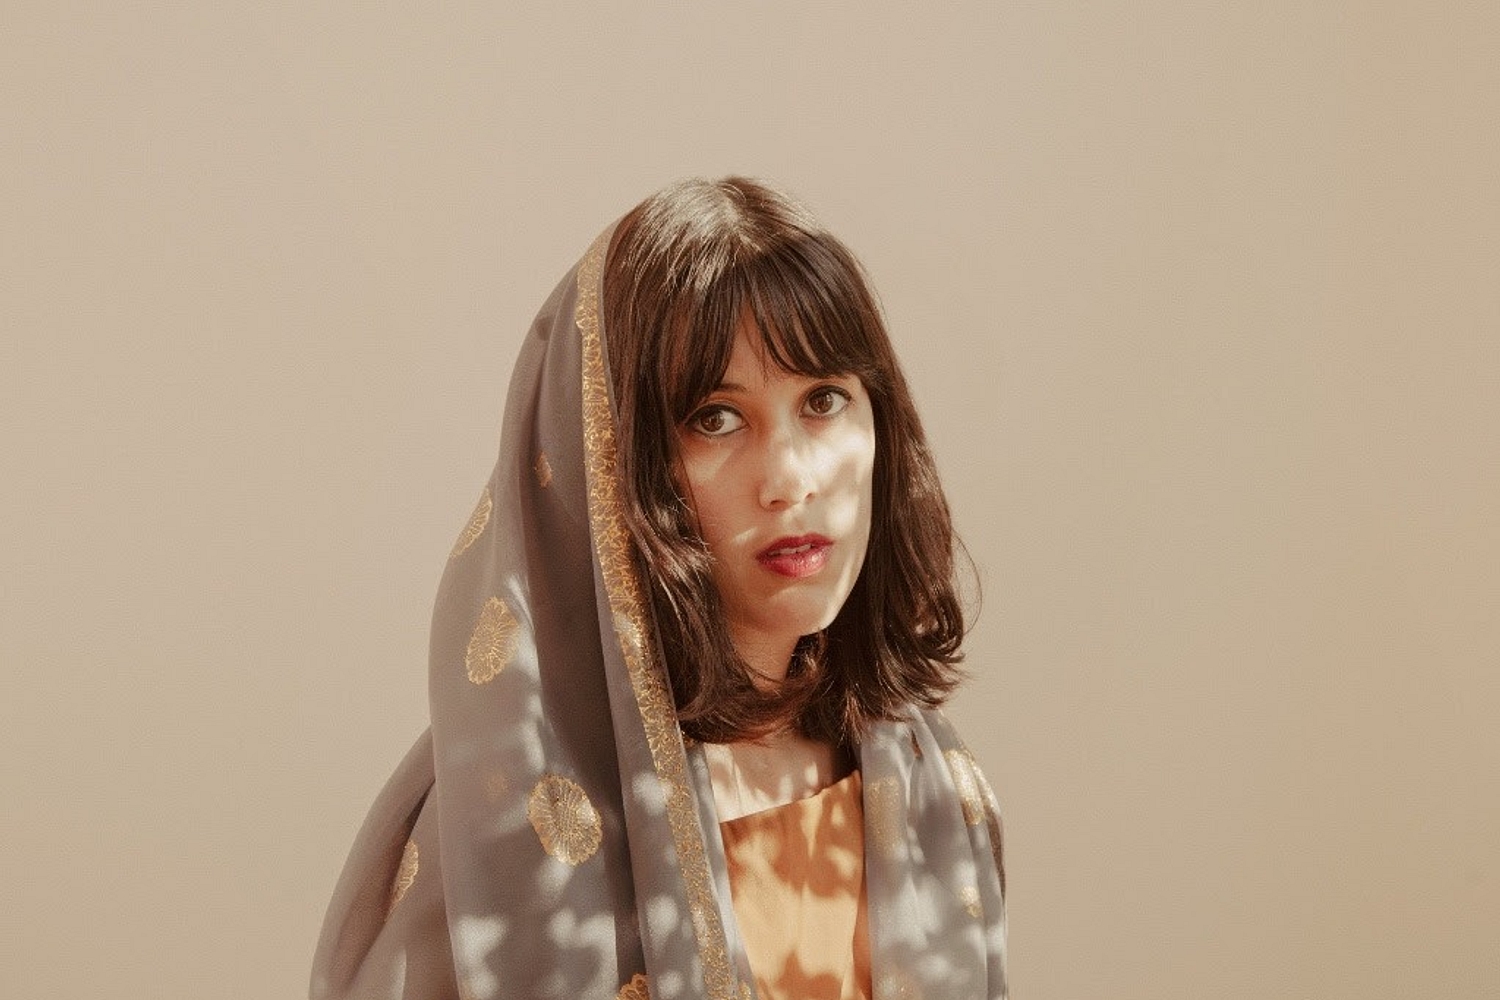 Half Waif is streaming her new EP ‘form/a’ in full